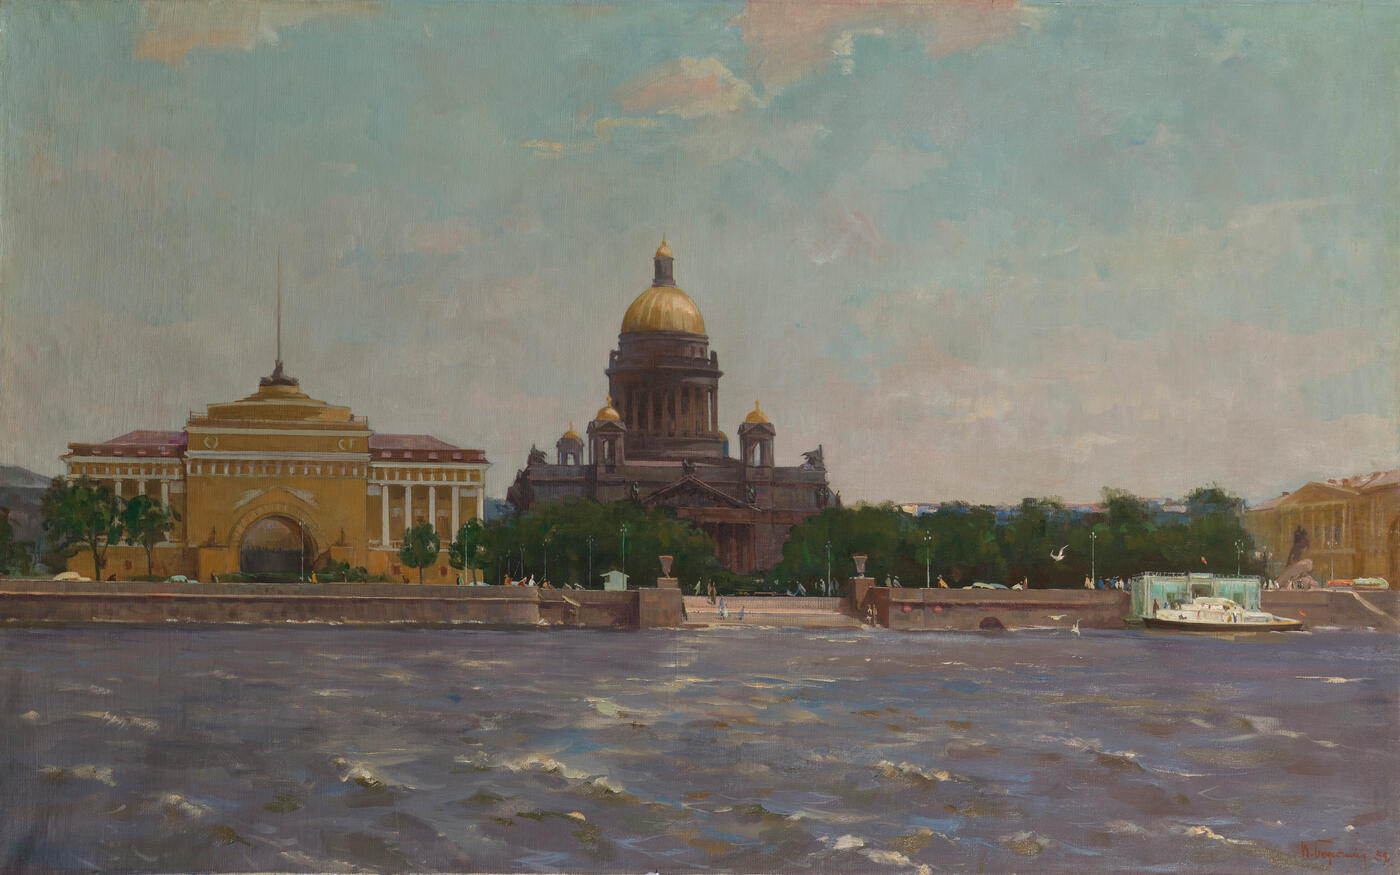 View of St Isaac's Cathedral from the Neva River, Leningrad